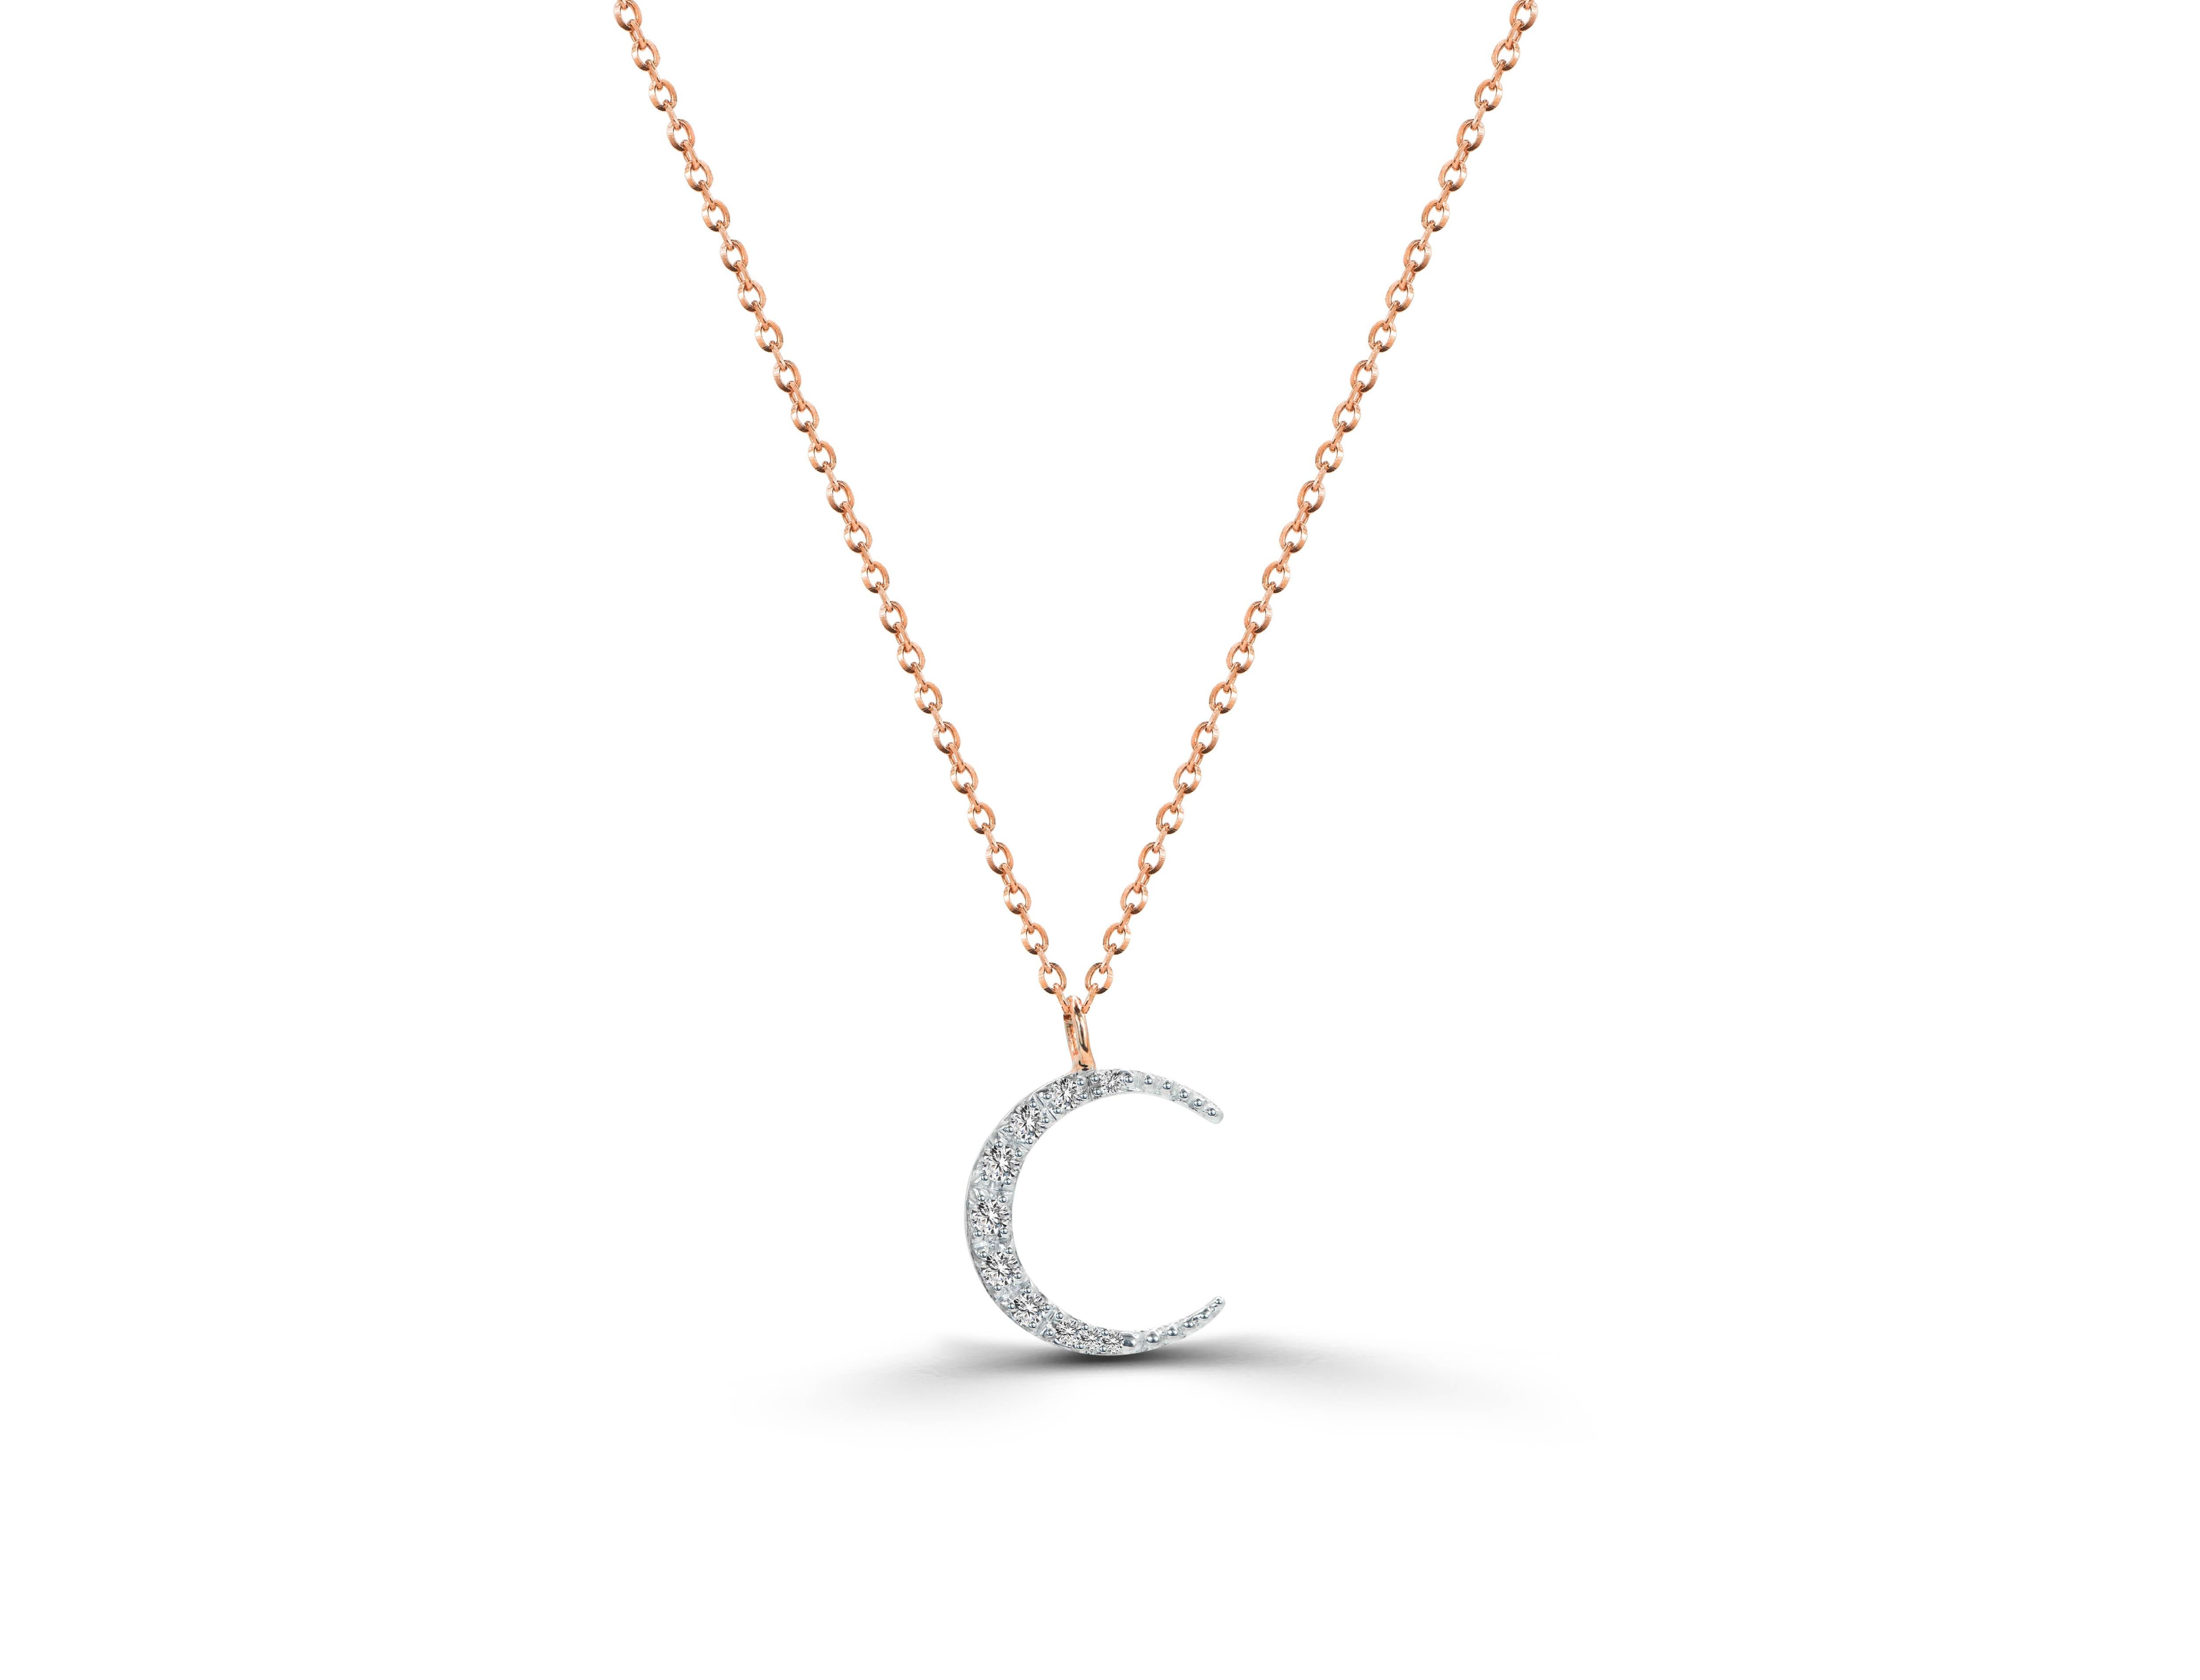 Crescent moon diamond necklace, Half moon necklace, Dainty diamond necklace, minimalist necklace, Gift for her, 14k gold, everyday necklace

Moon necklace, diamond Moon, Astronomy necklace, wedding necklace, Diamond pendant, bridesmaid necklace,